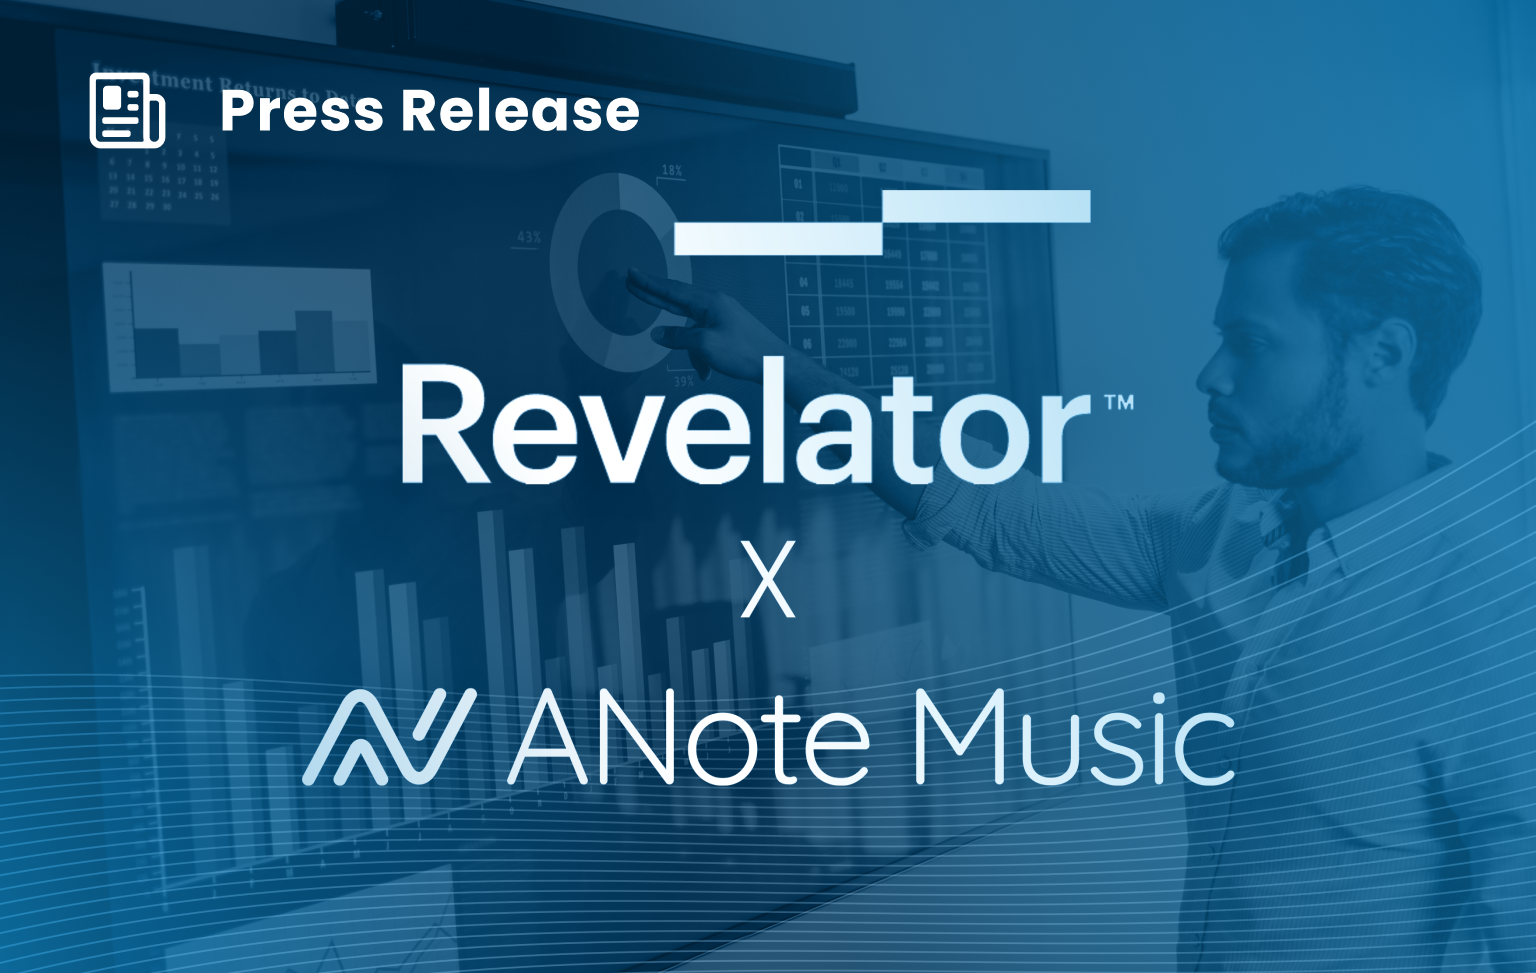 ANote expands Revelator ’s music IP trading services through new partnership, further democratising music IP access